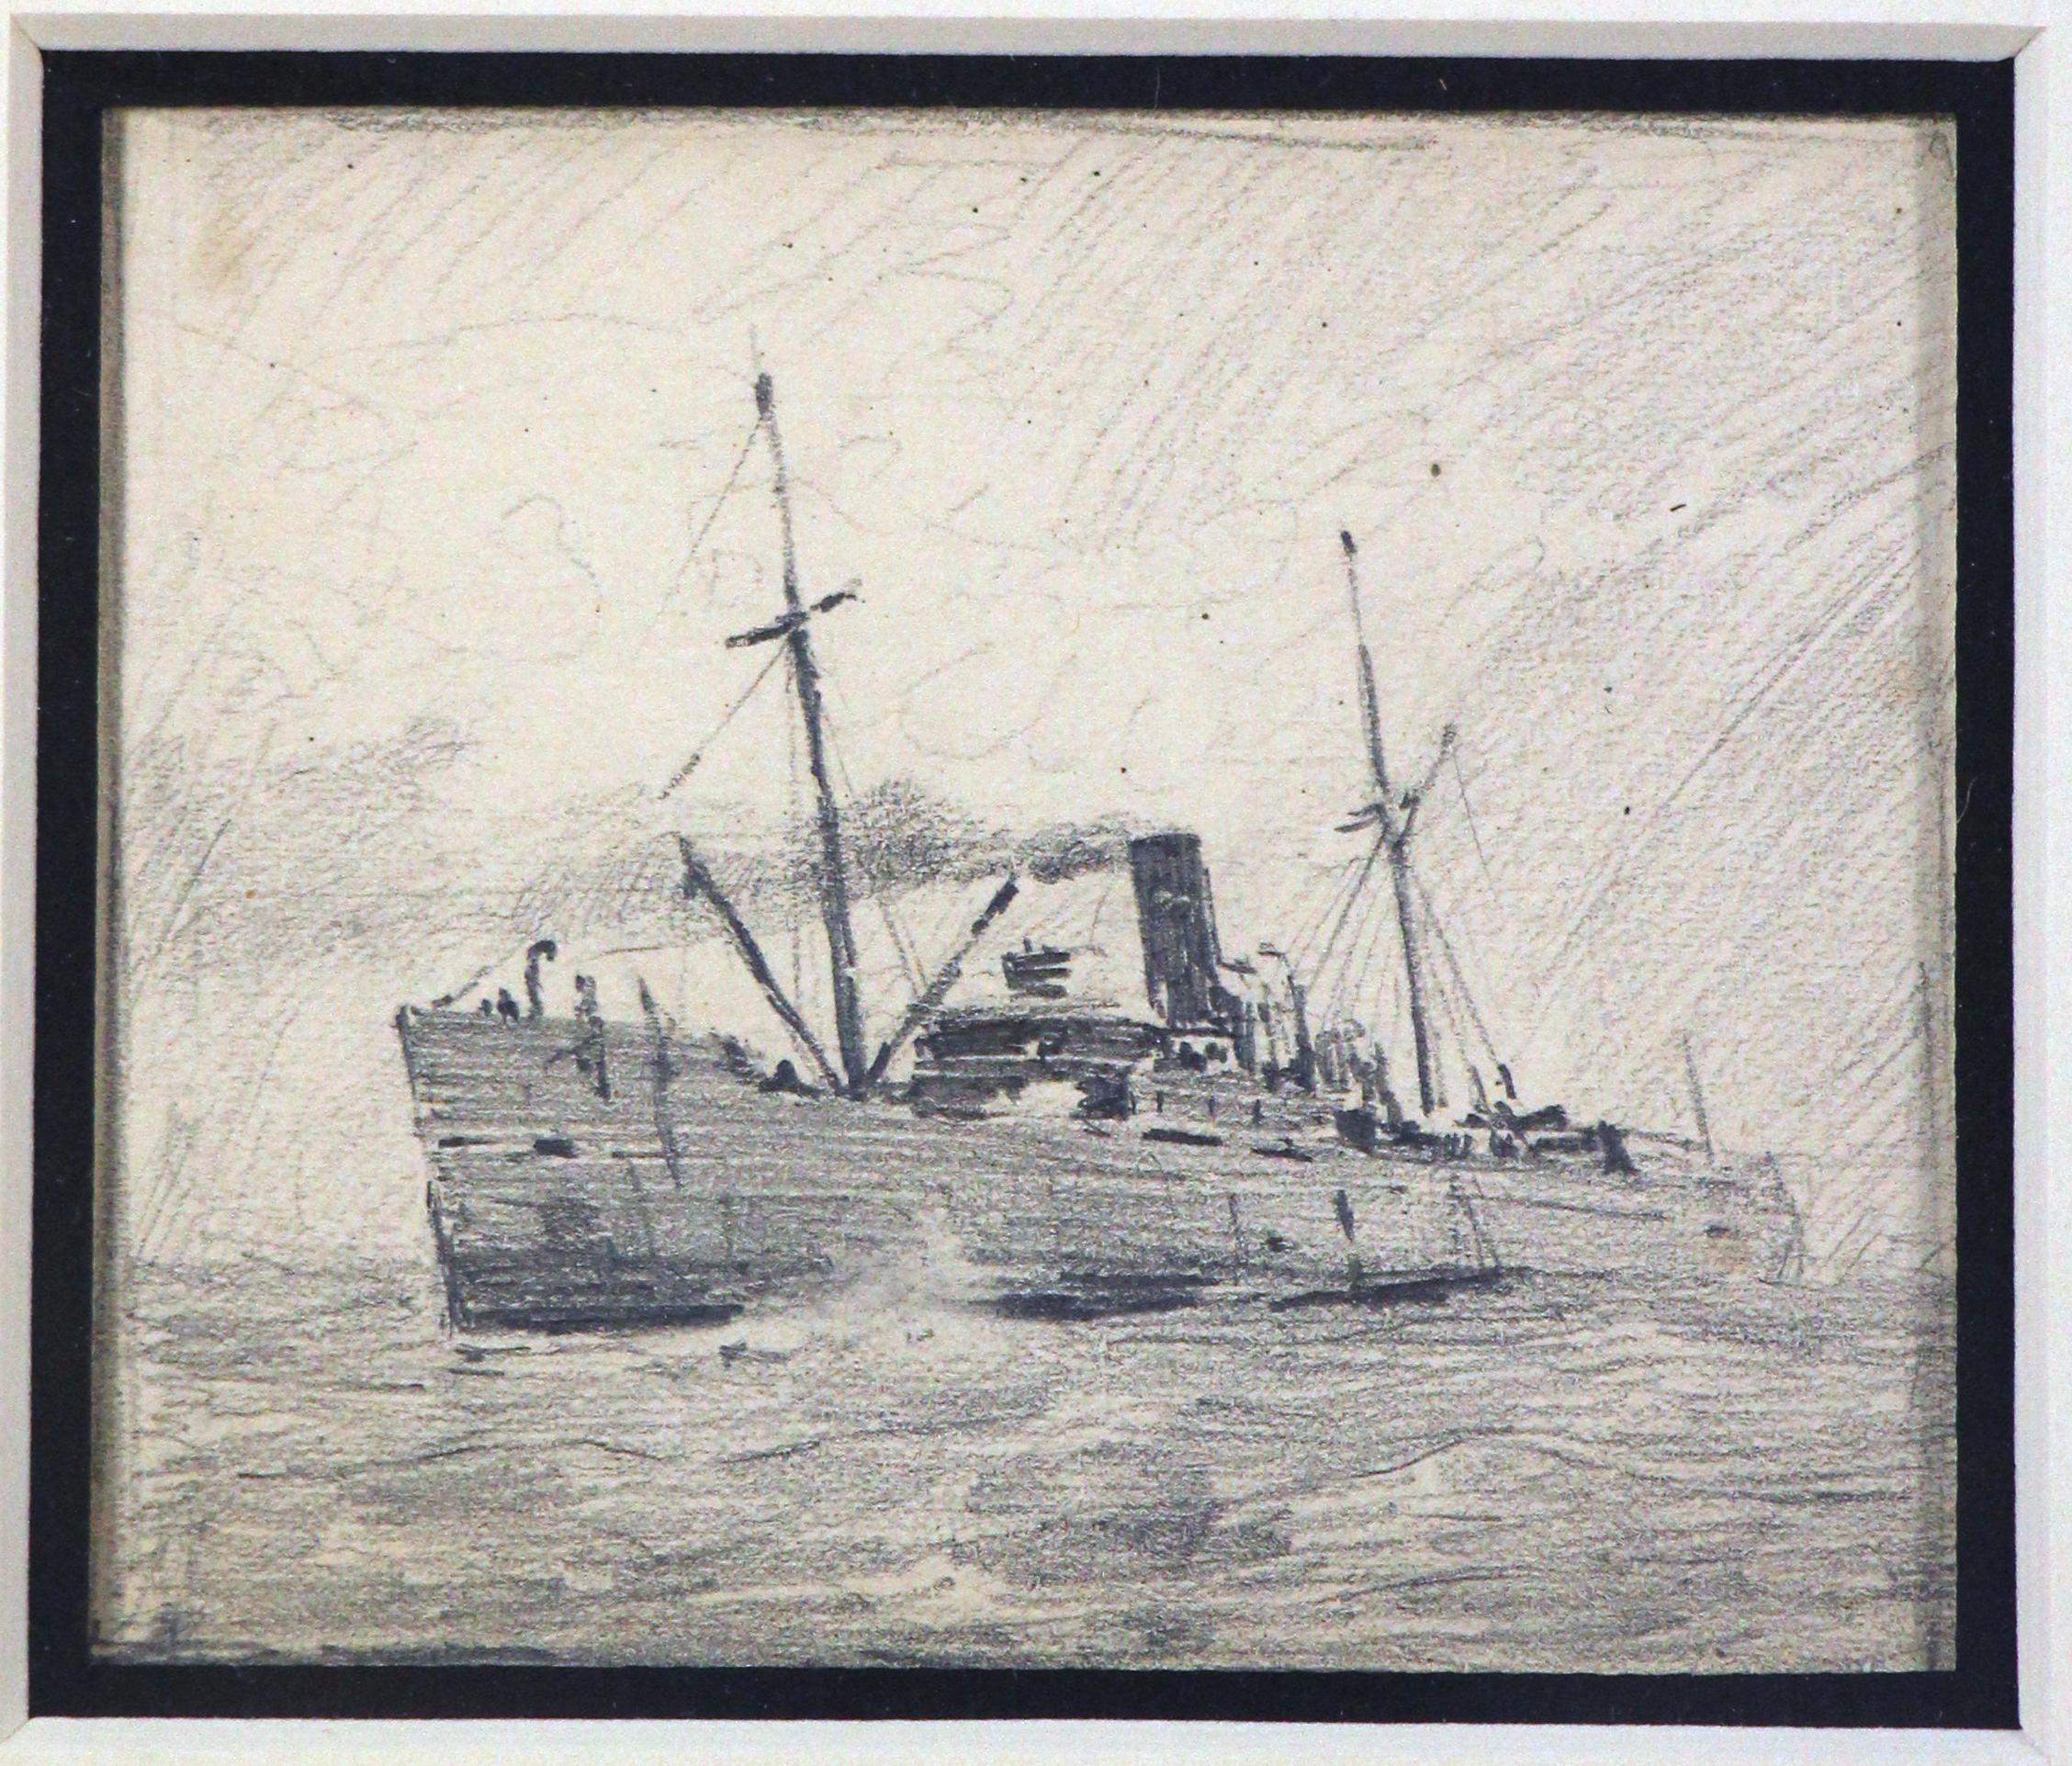 Steamer Ship, American Impressionist, Pencil Drawing on Paper, 1899 - Art by Henry Bayley Snell